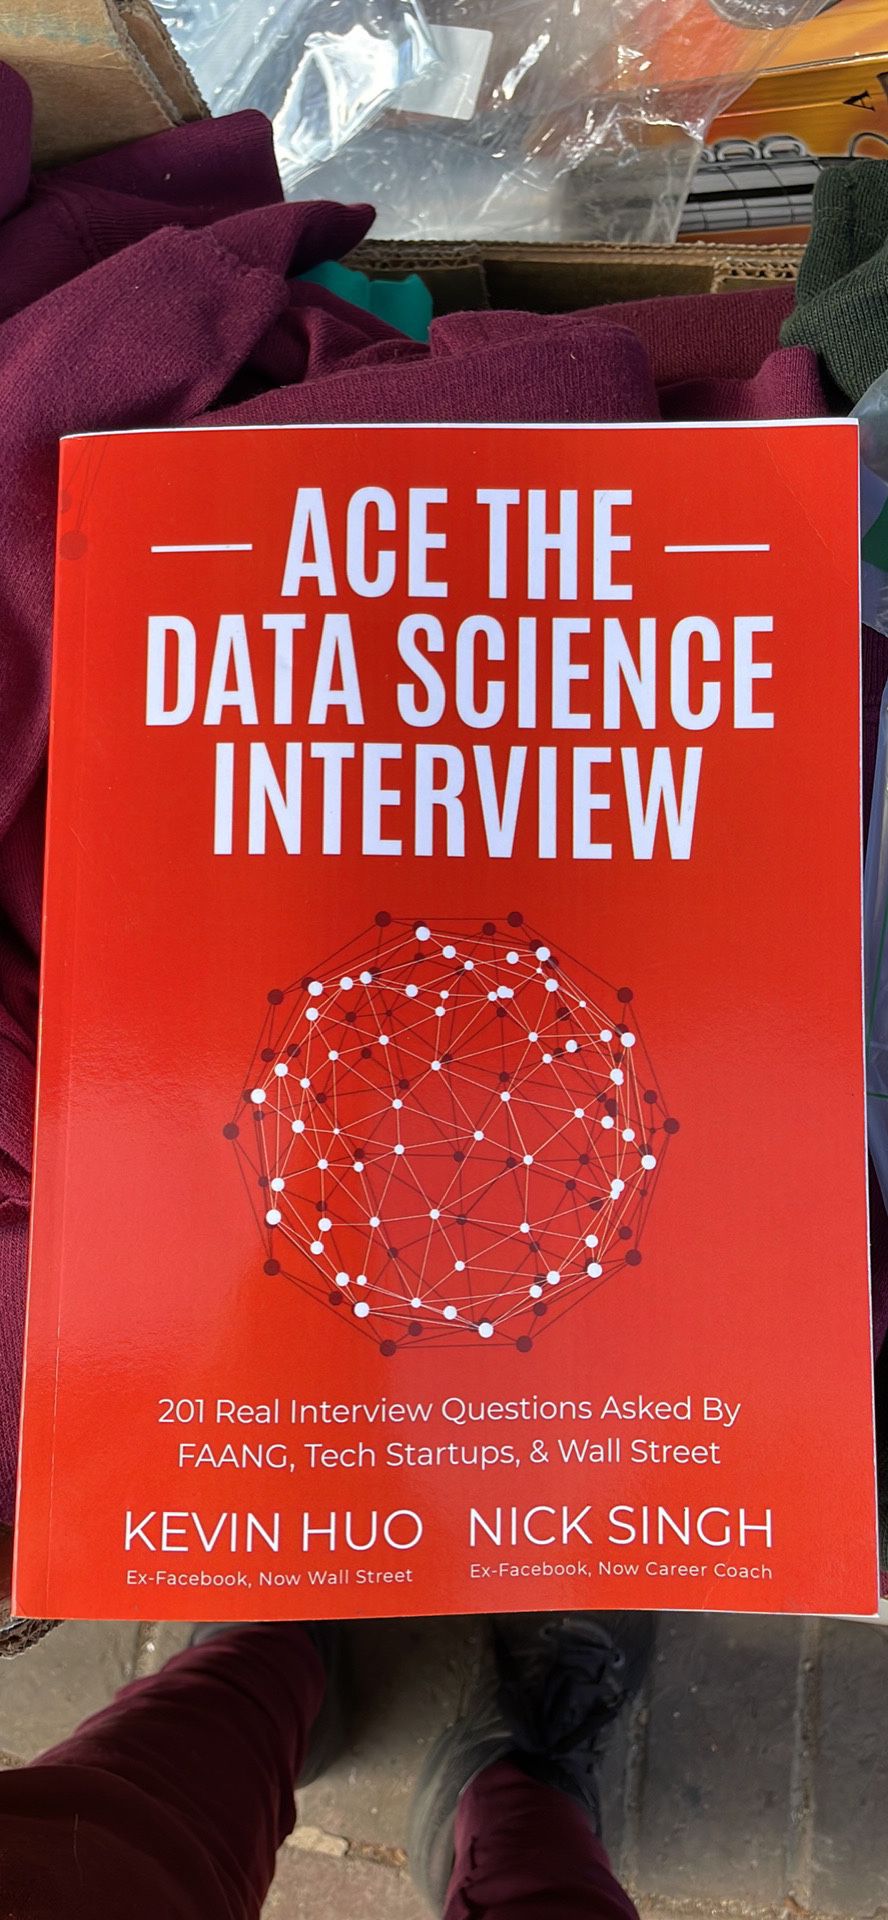 Ace the Data Science Interview: 201 Real Interview Questions Asked By FAANG, Tech Startups, & Wall Street ISBN-13: (contact info removed)973838